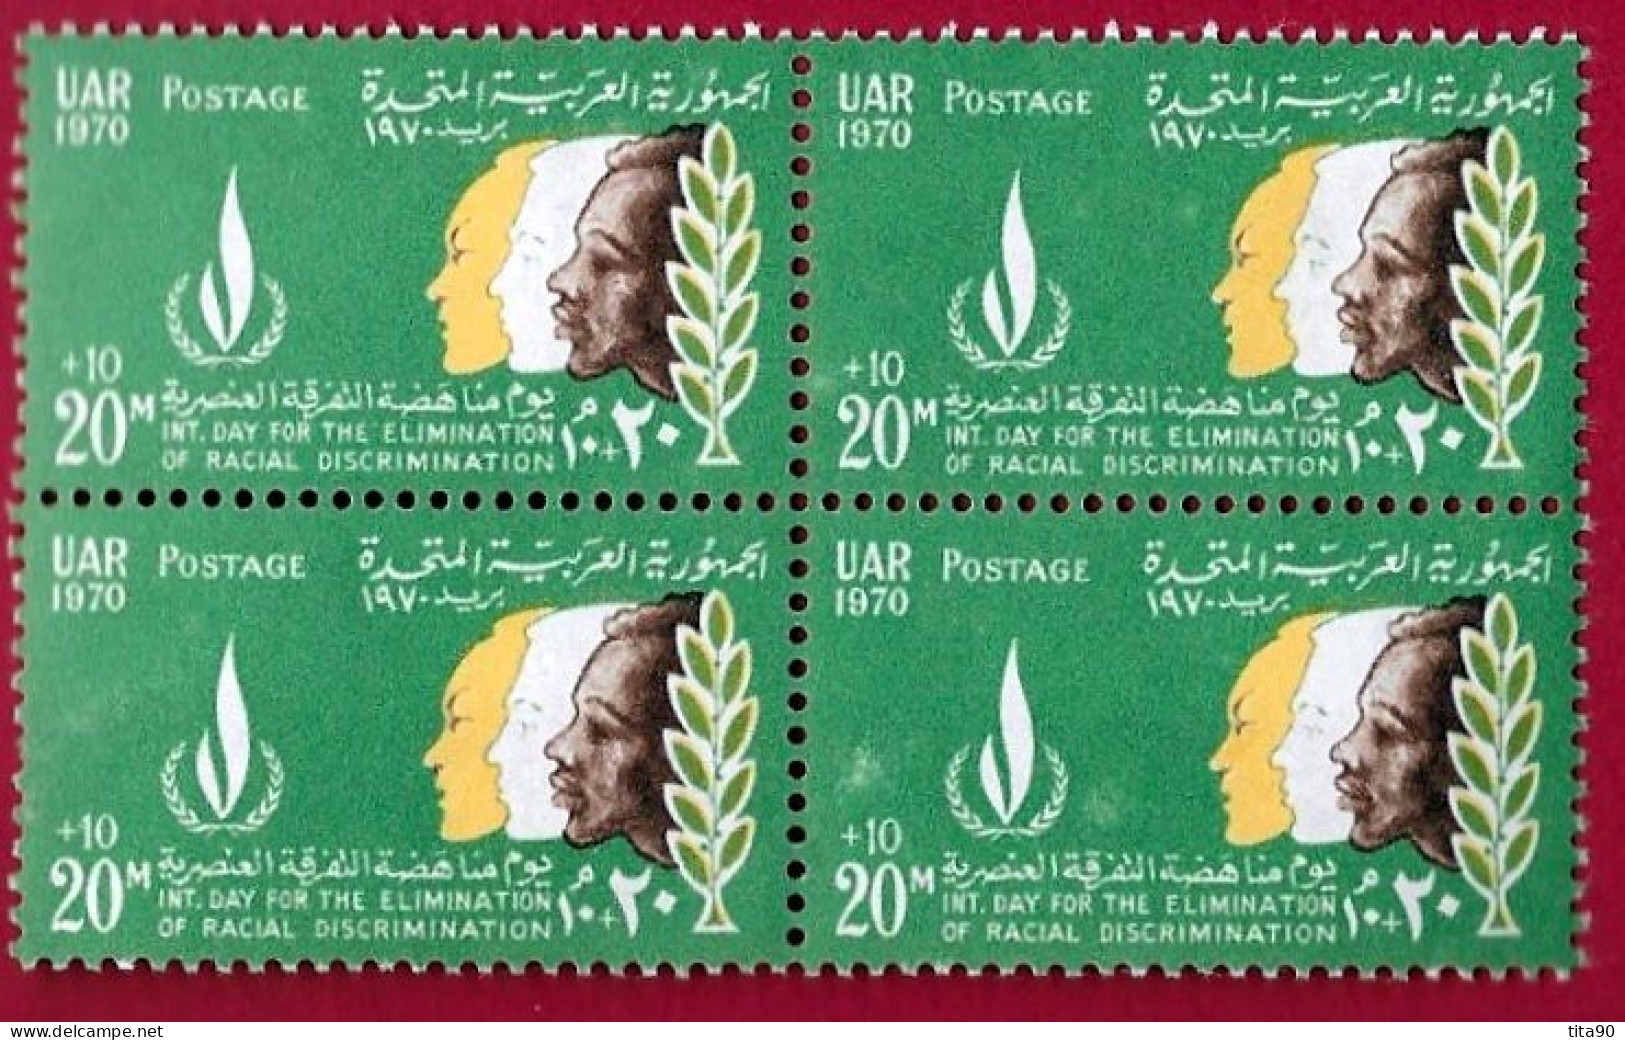 Egypte - Egypt 1970  Block Of 4 MNH   20m + 10m Racial Equality Day - Ungebraucht